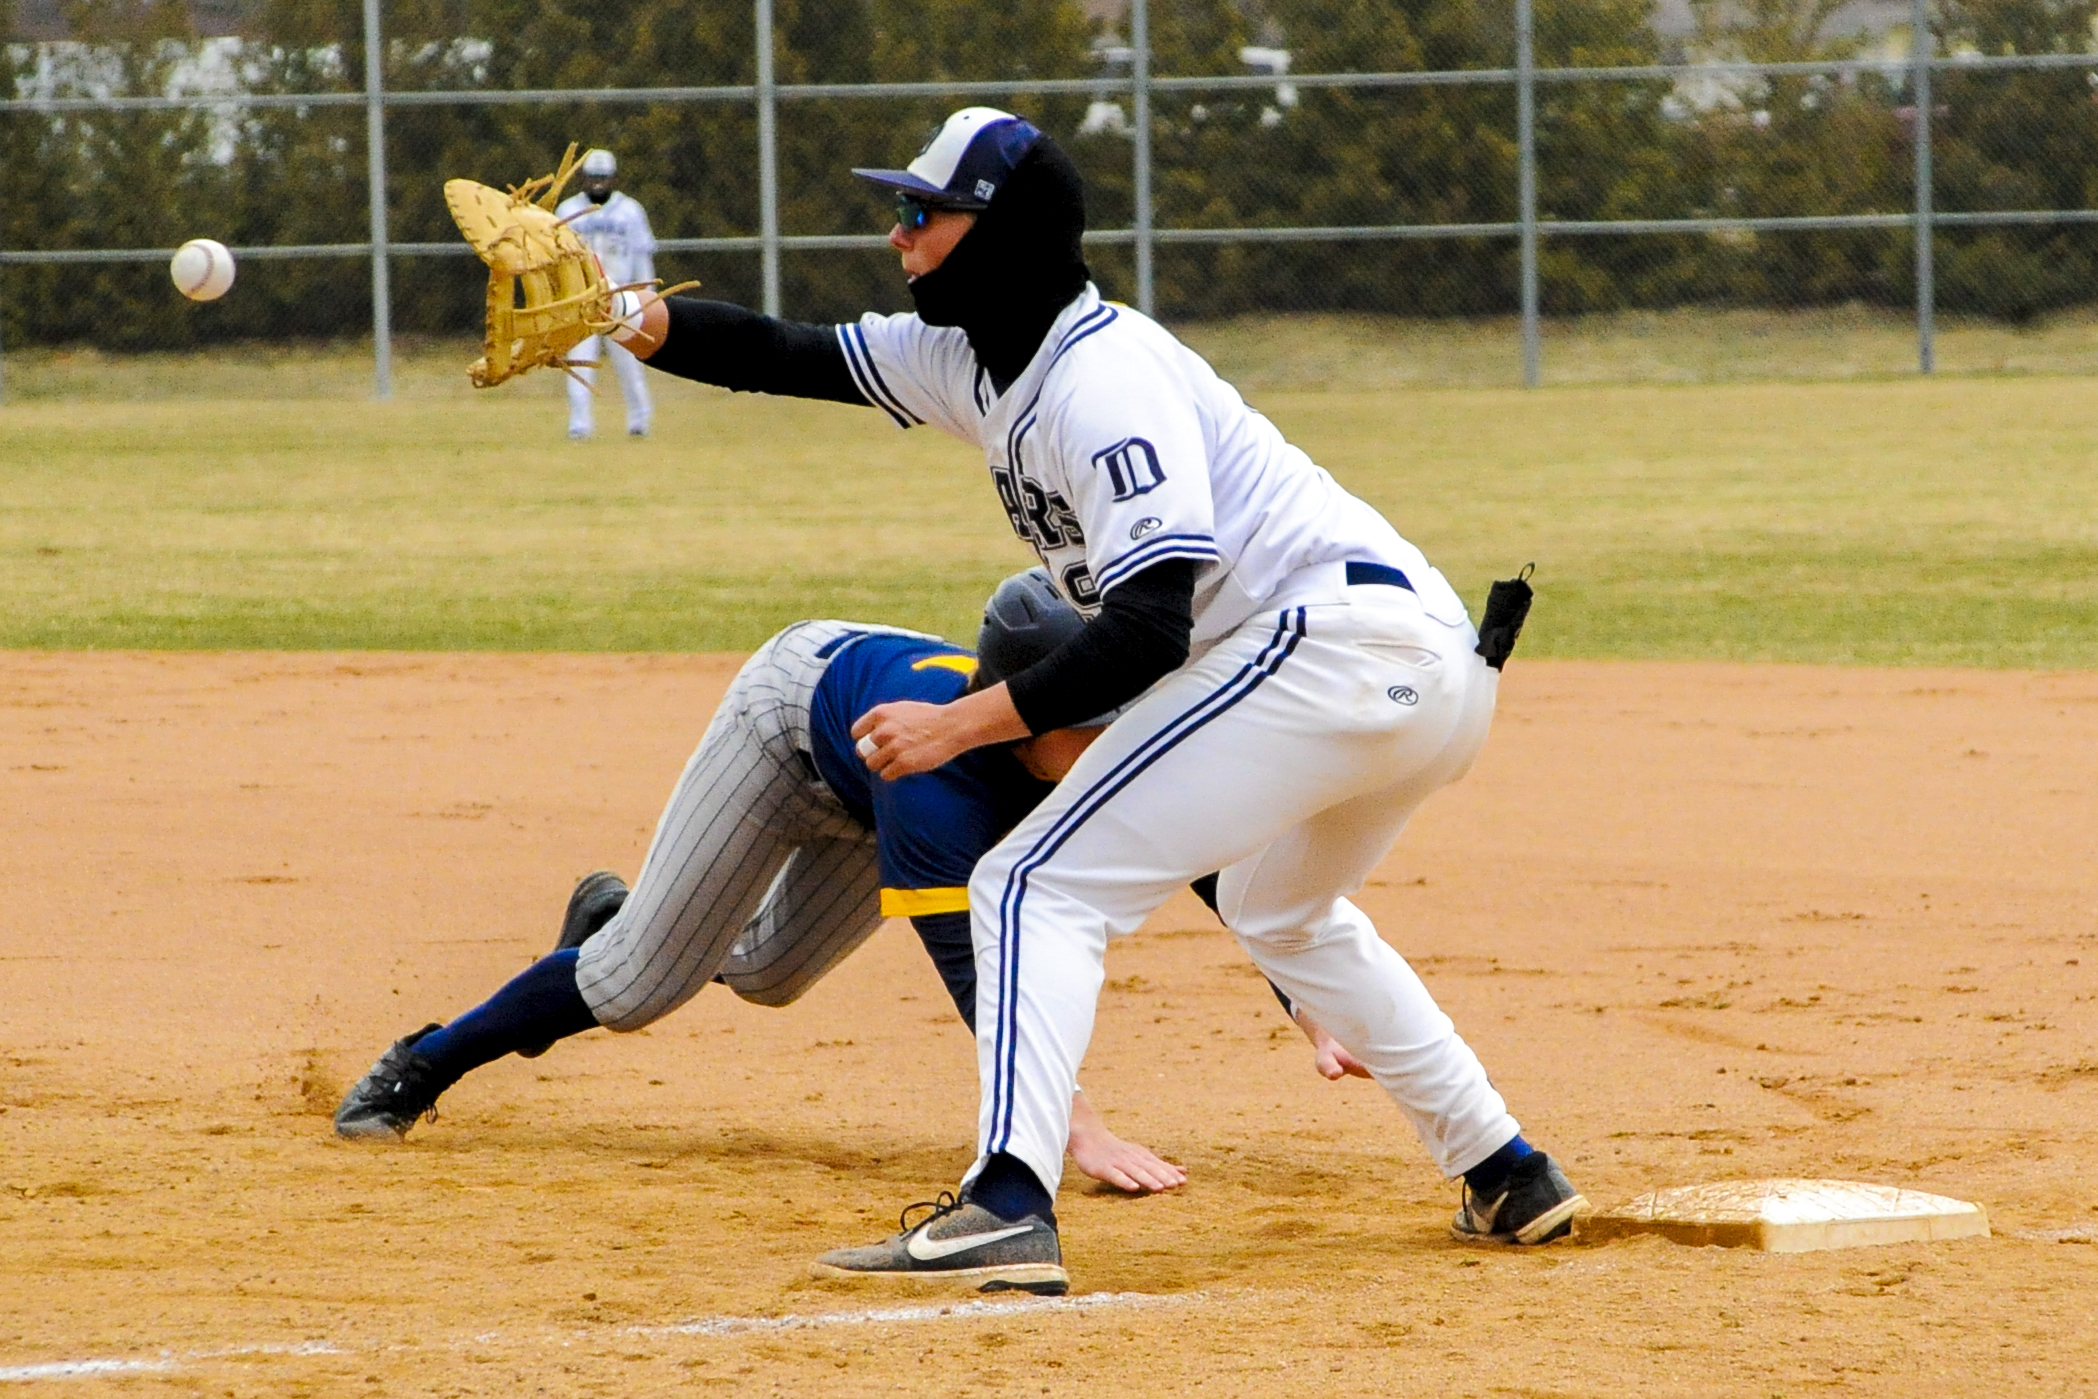 DMACC baseball team drops two of three games against ICCC